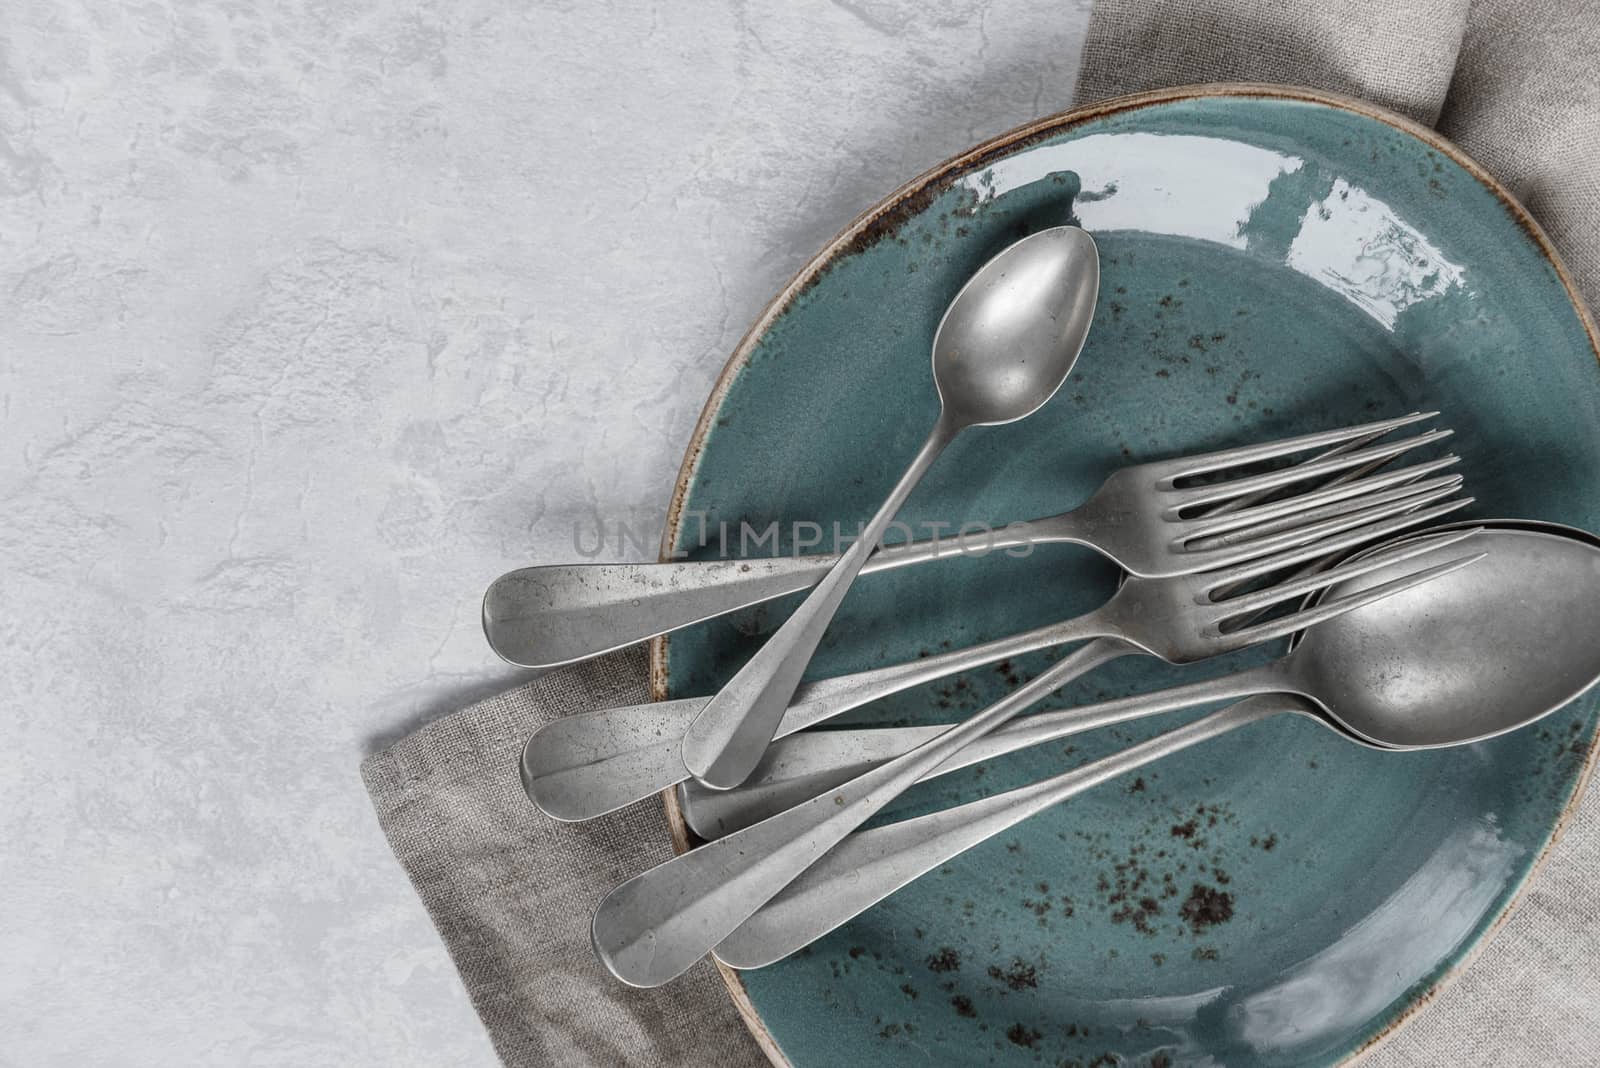 Various silverware on a blue ceramic plate and gray flax napkin are on the background of gray concrete surface, with copy-space